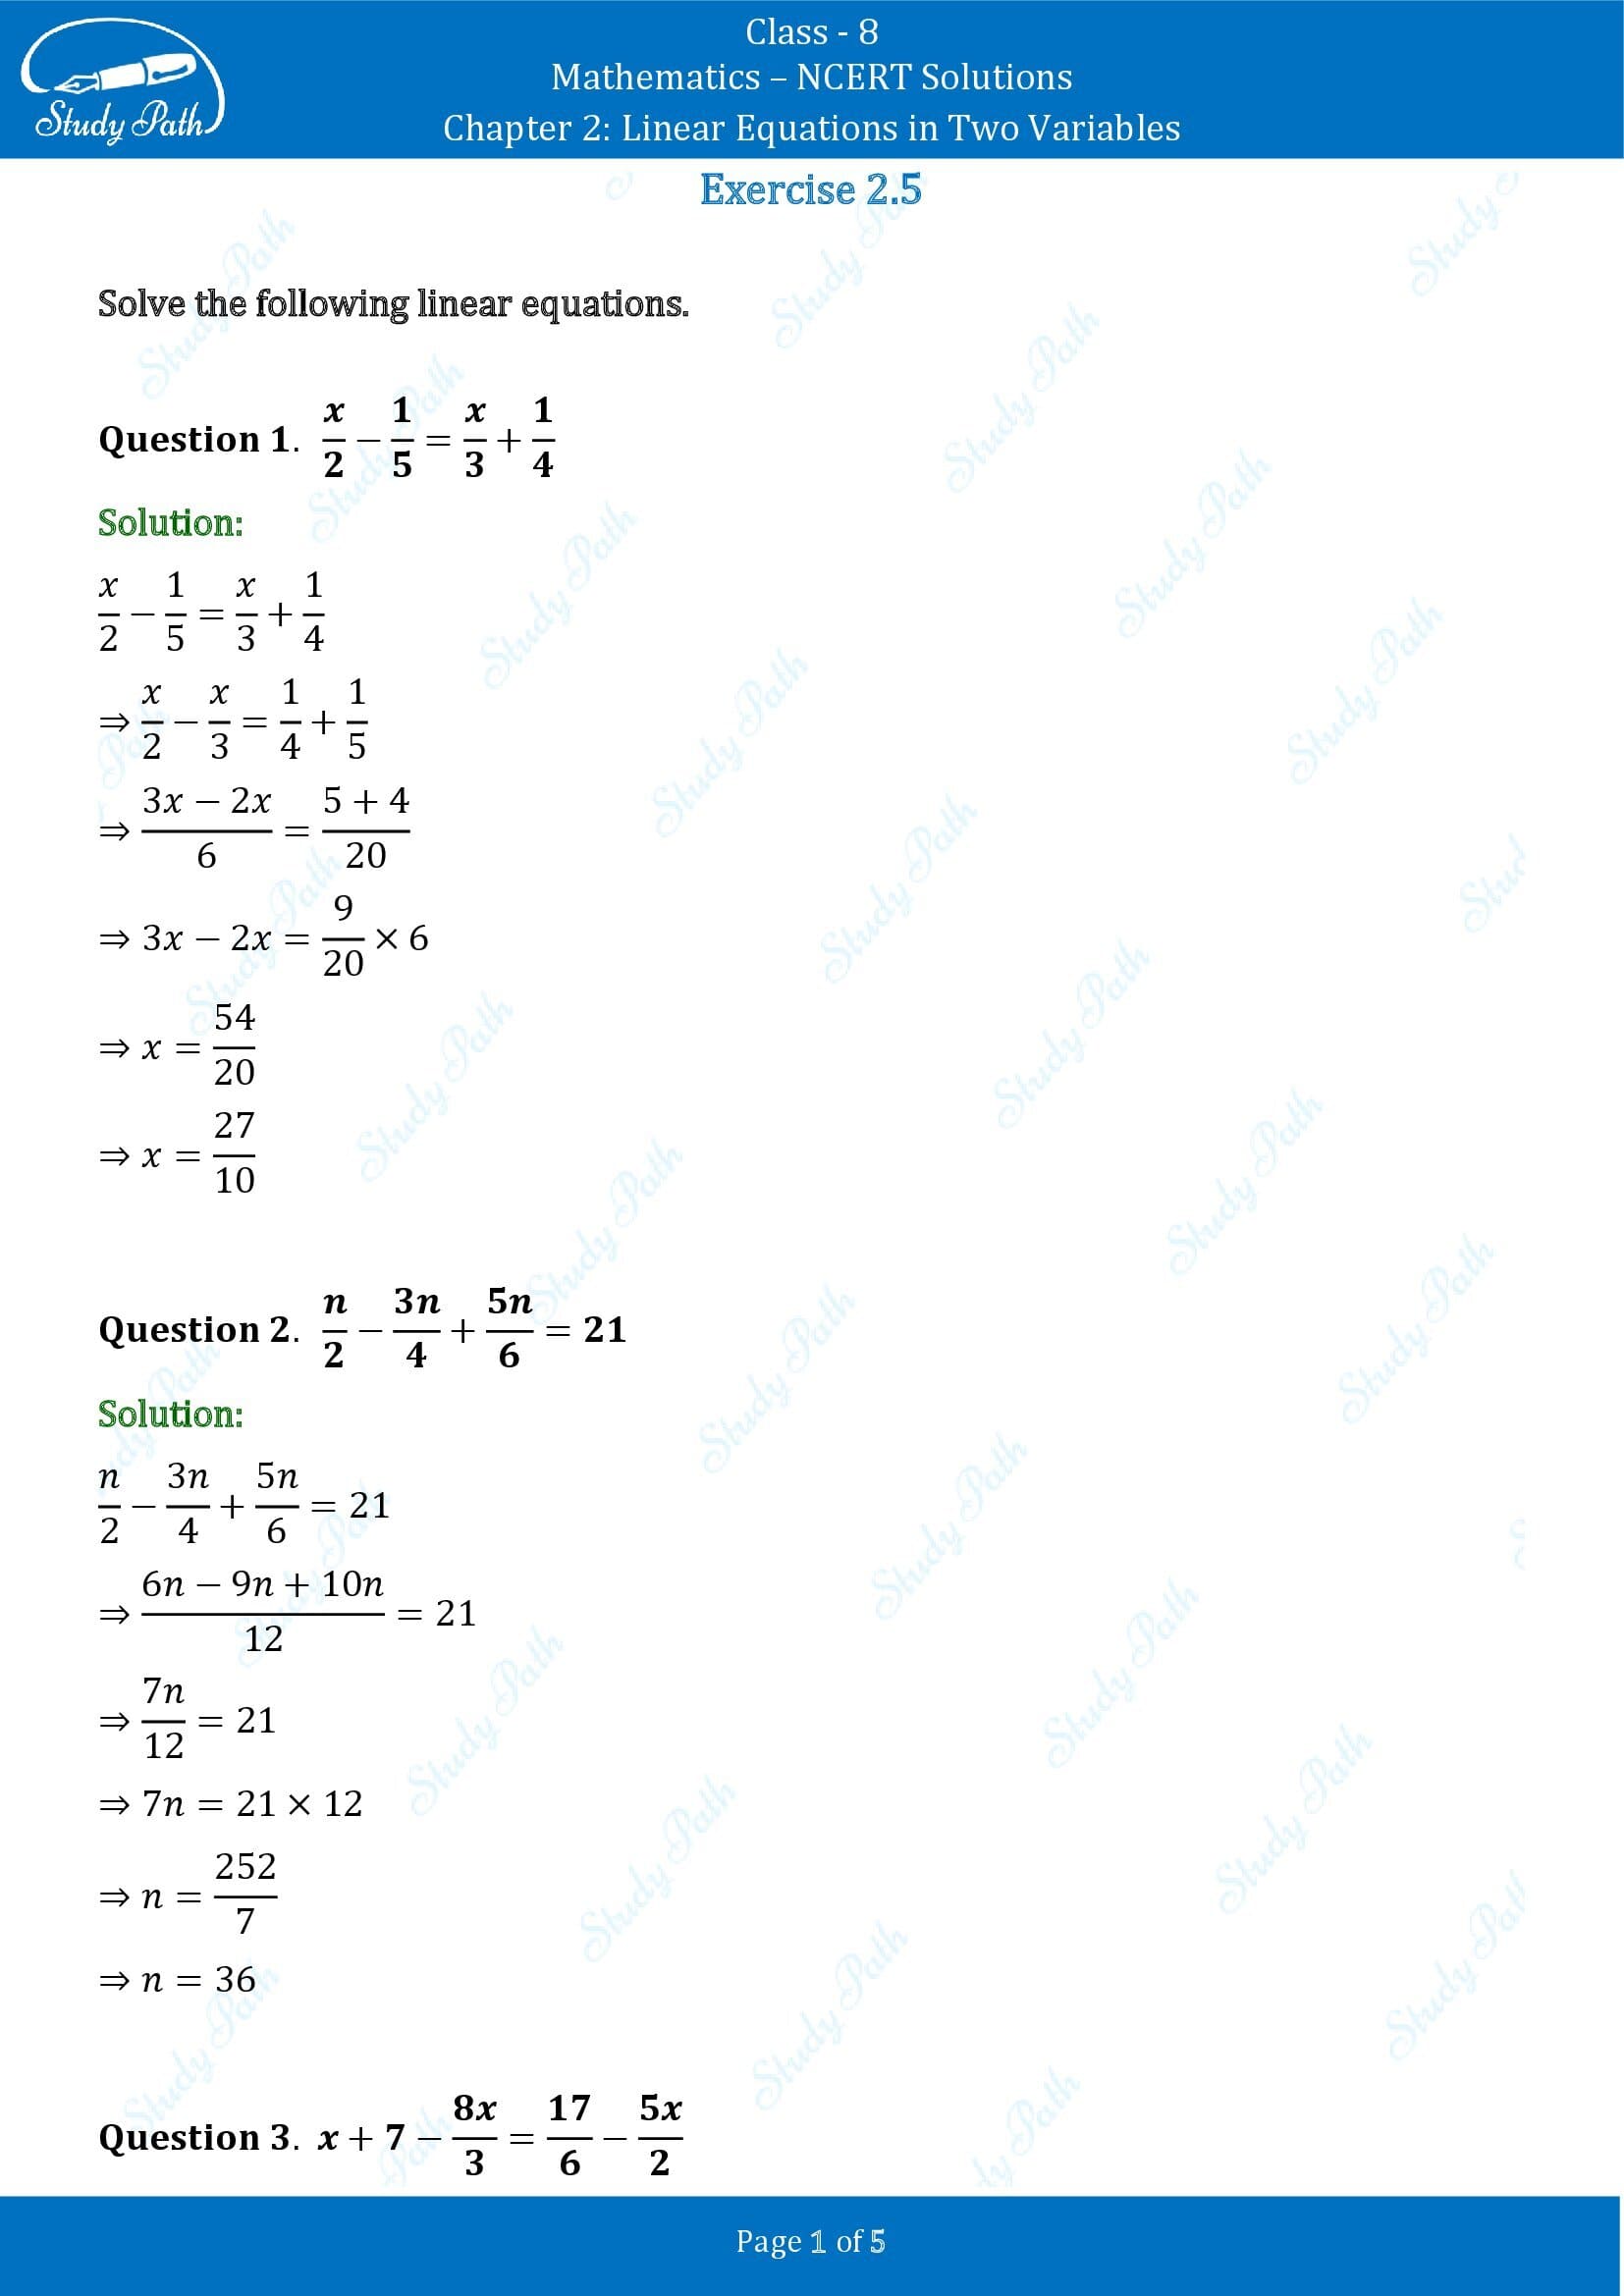 NCERT Solutions for Class 8 Maths Chapter 2 Linear Equations in Two Variables Exercise 2.5 00001